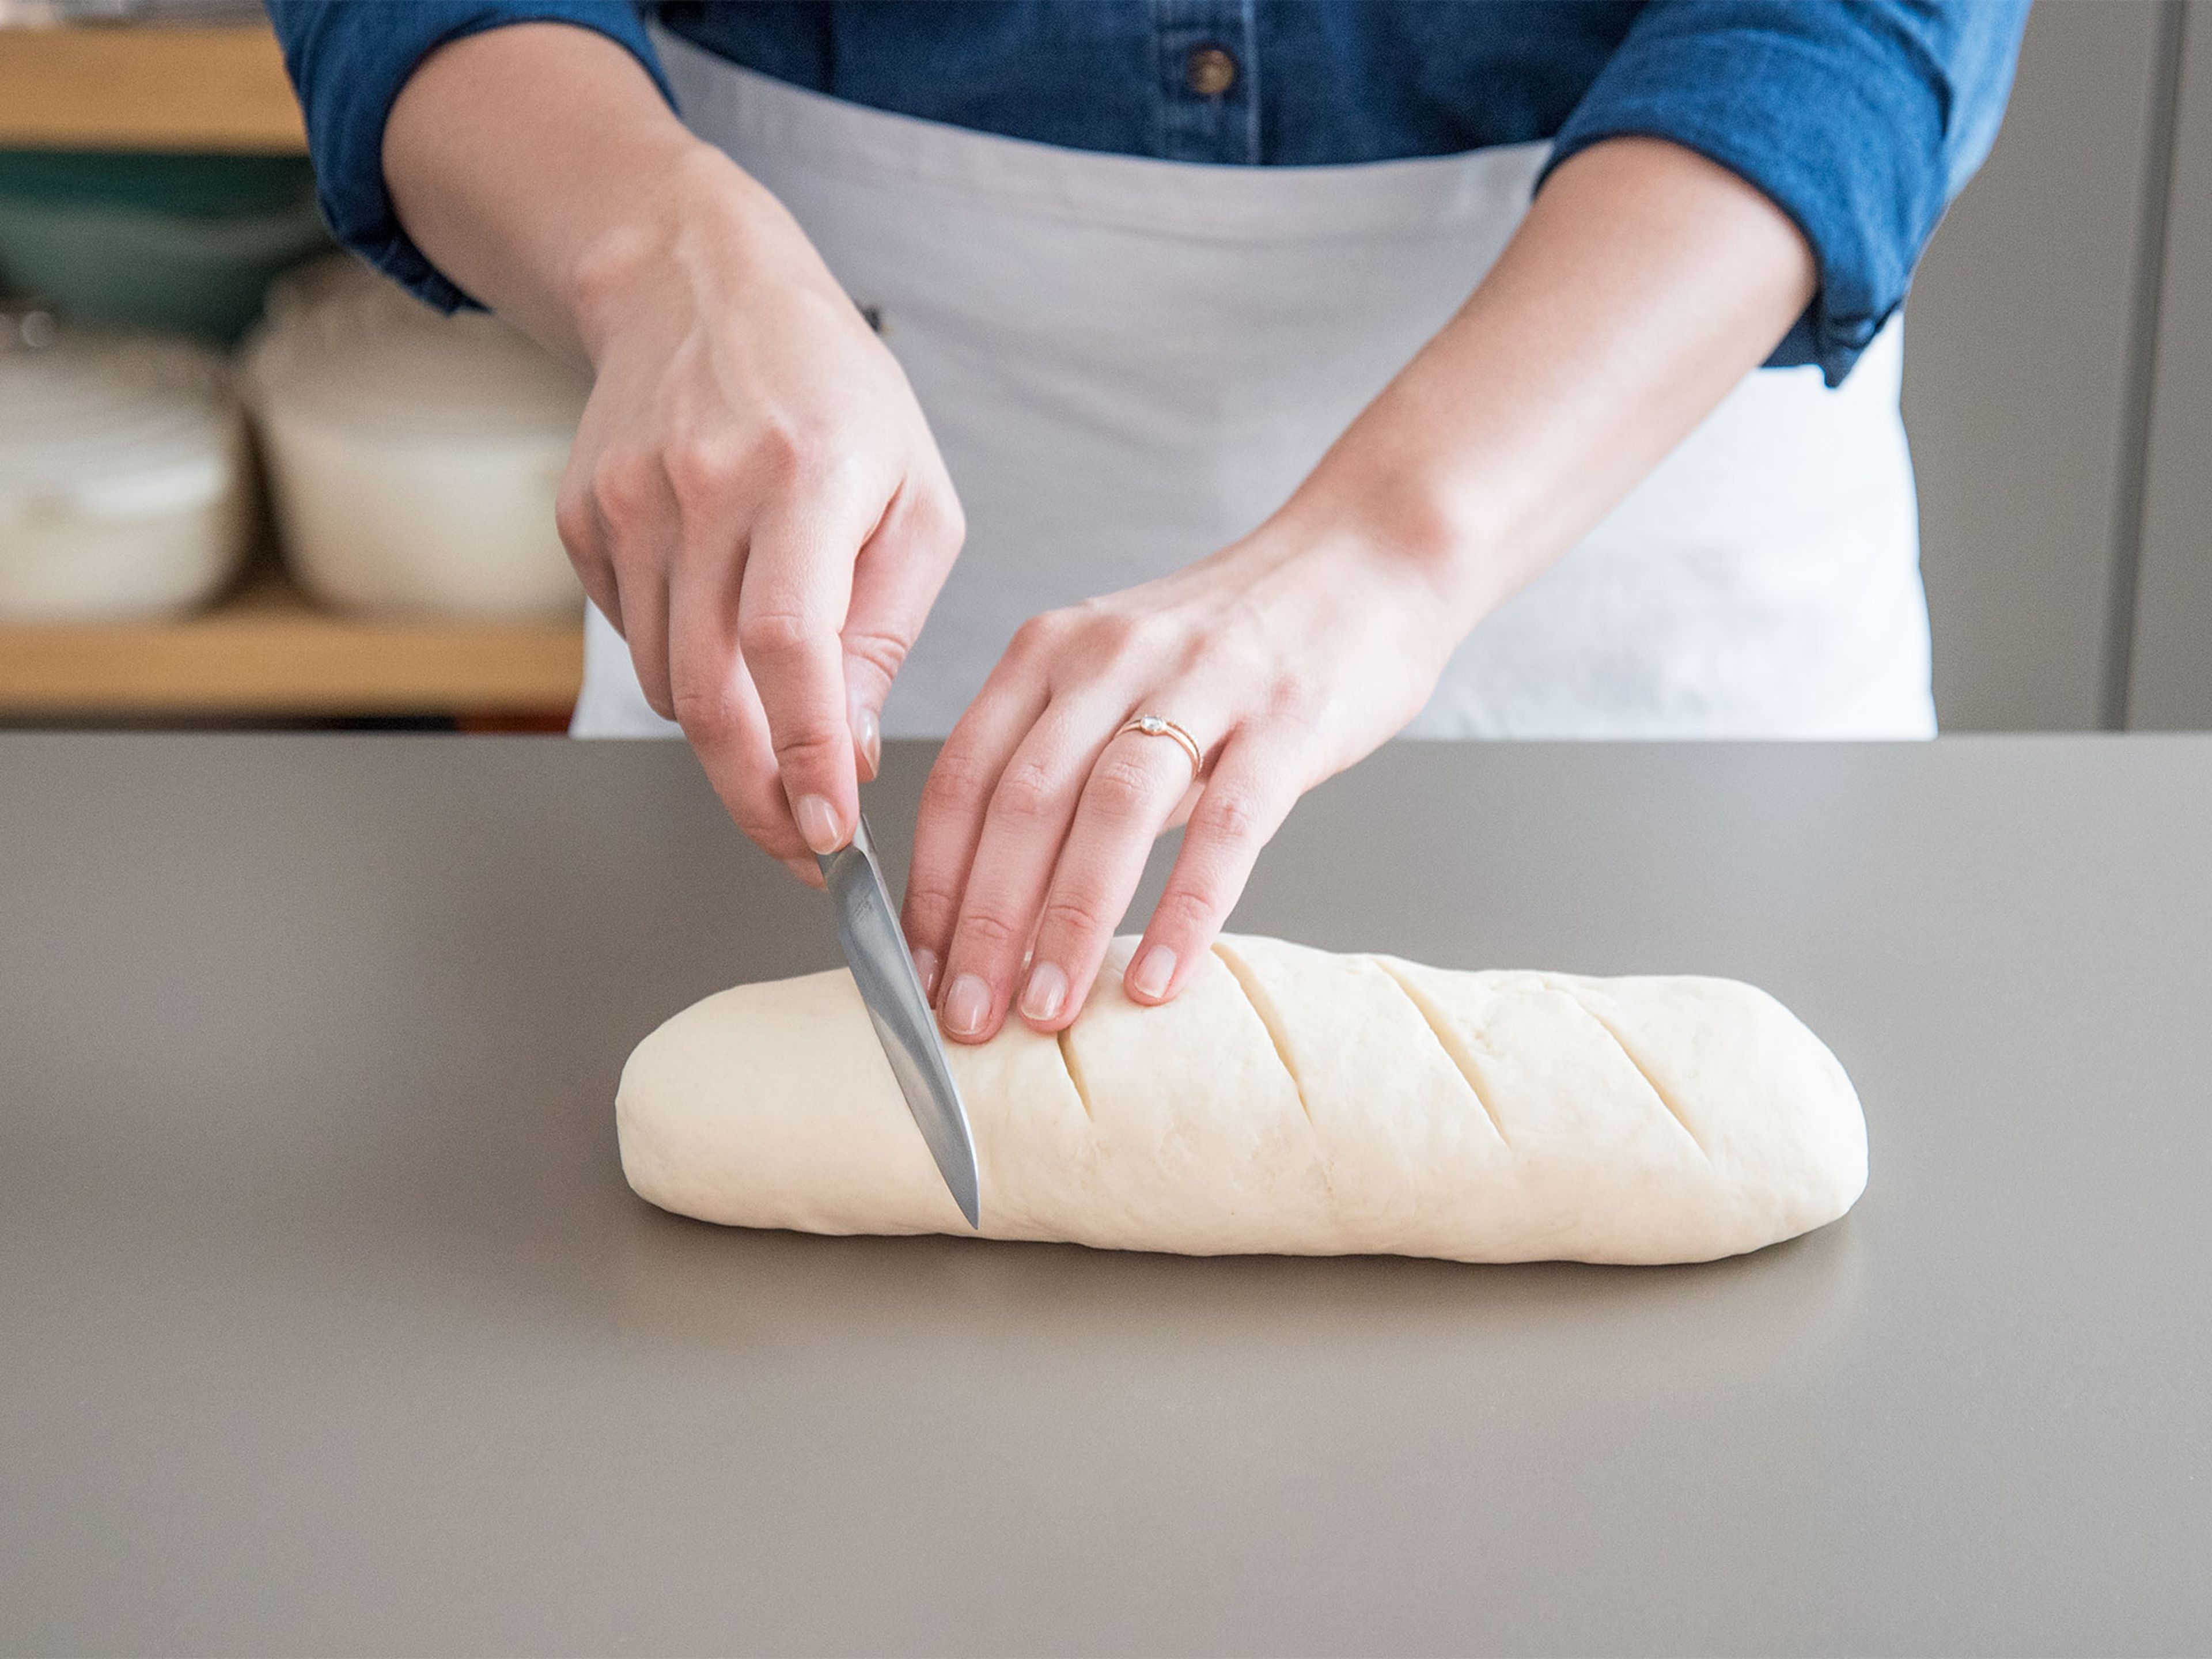 Briefly knead dough, then form into a 25-cm/10-in. loaf. Transfer to a cutting board and score loaf diagonally several times (approx. 1-cm/0.4-in. deep). Wrap bread and cutting board in plastic wrap, cover with a damp kitchen towel, and freeze for at least 12 hrs.